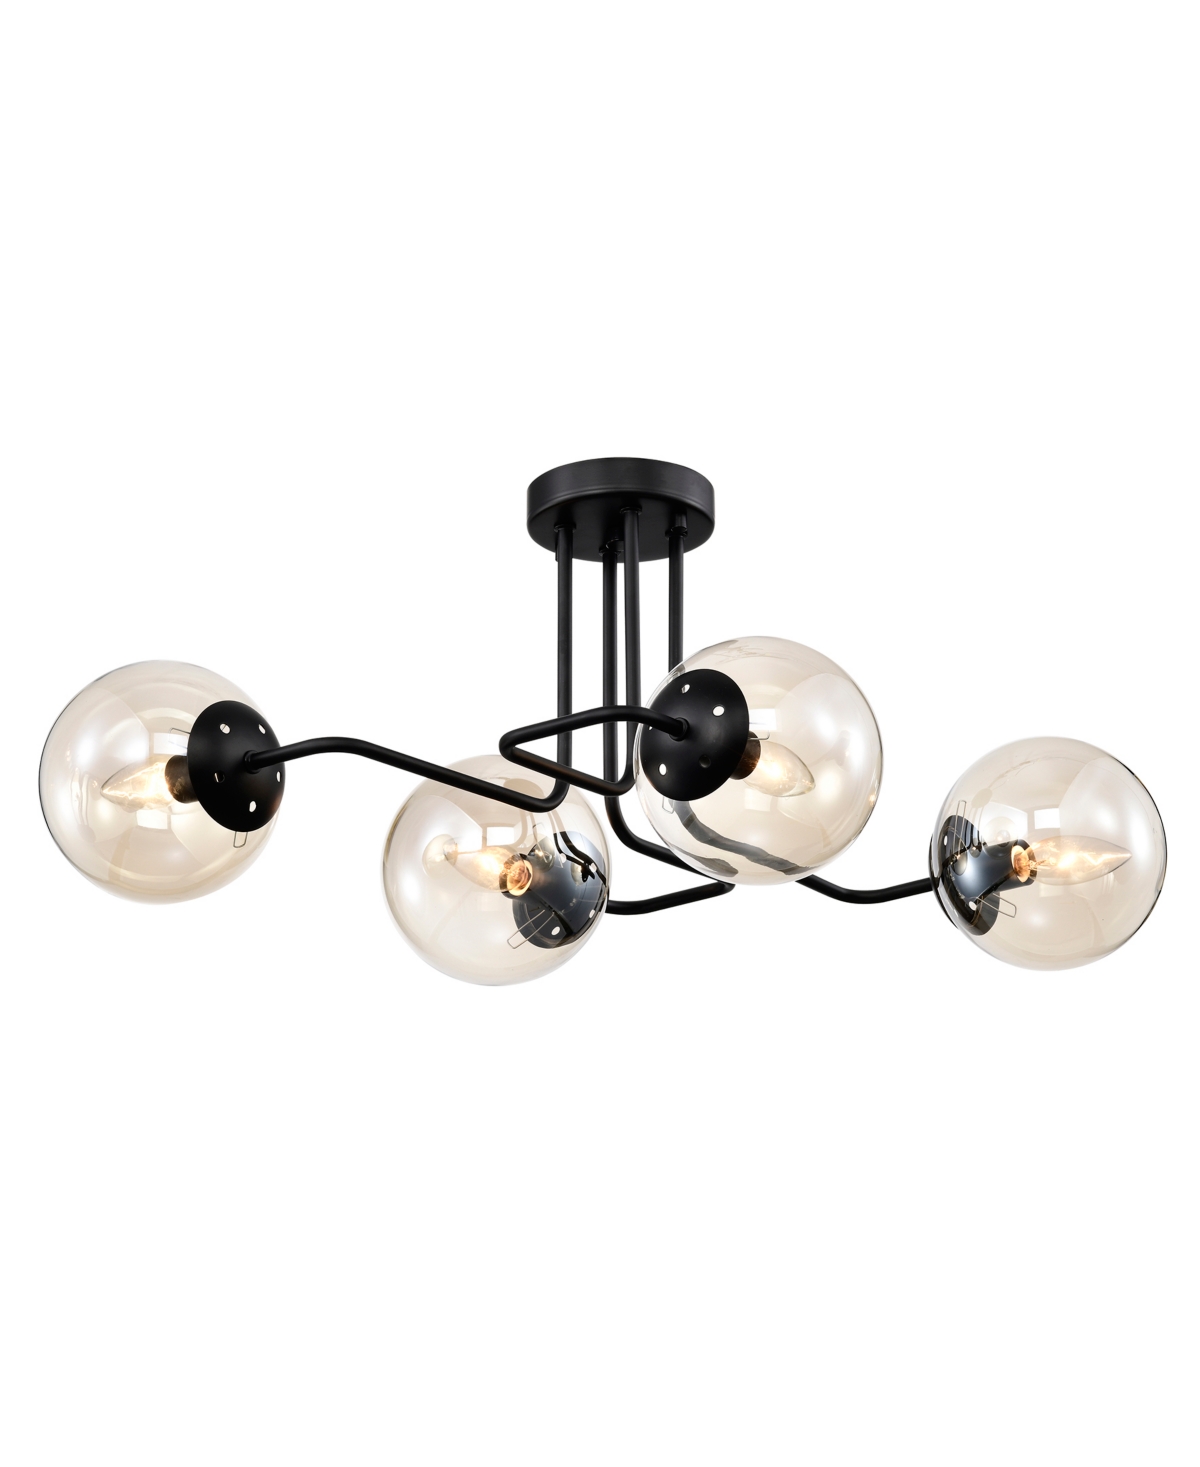 Home Accessories Ziza 22" 4-light Indoor Finish Semi-flush Mount Ceiling Light With Light Kit In Matte Black